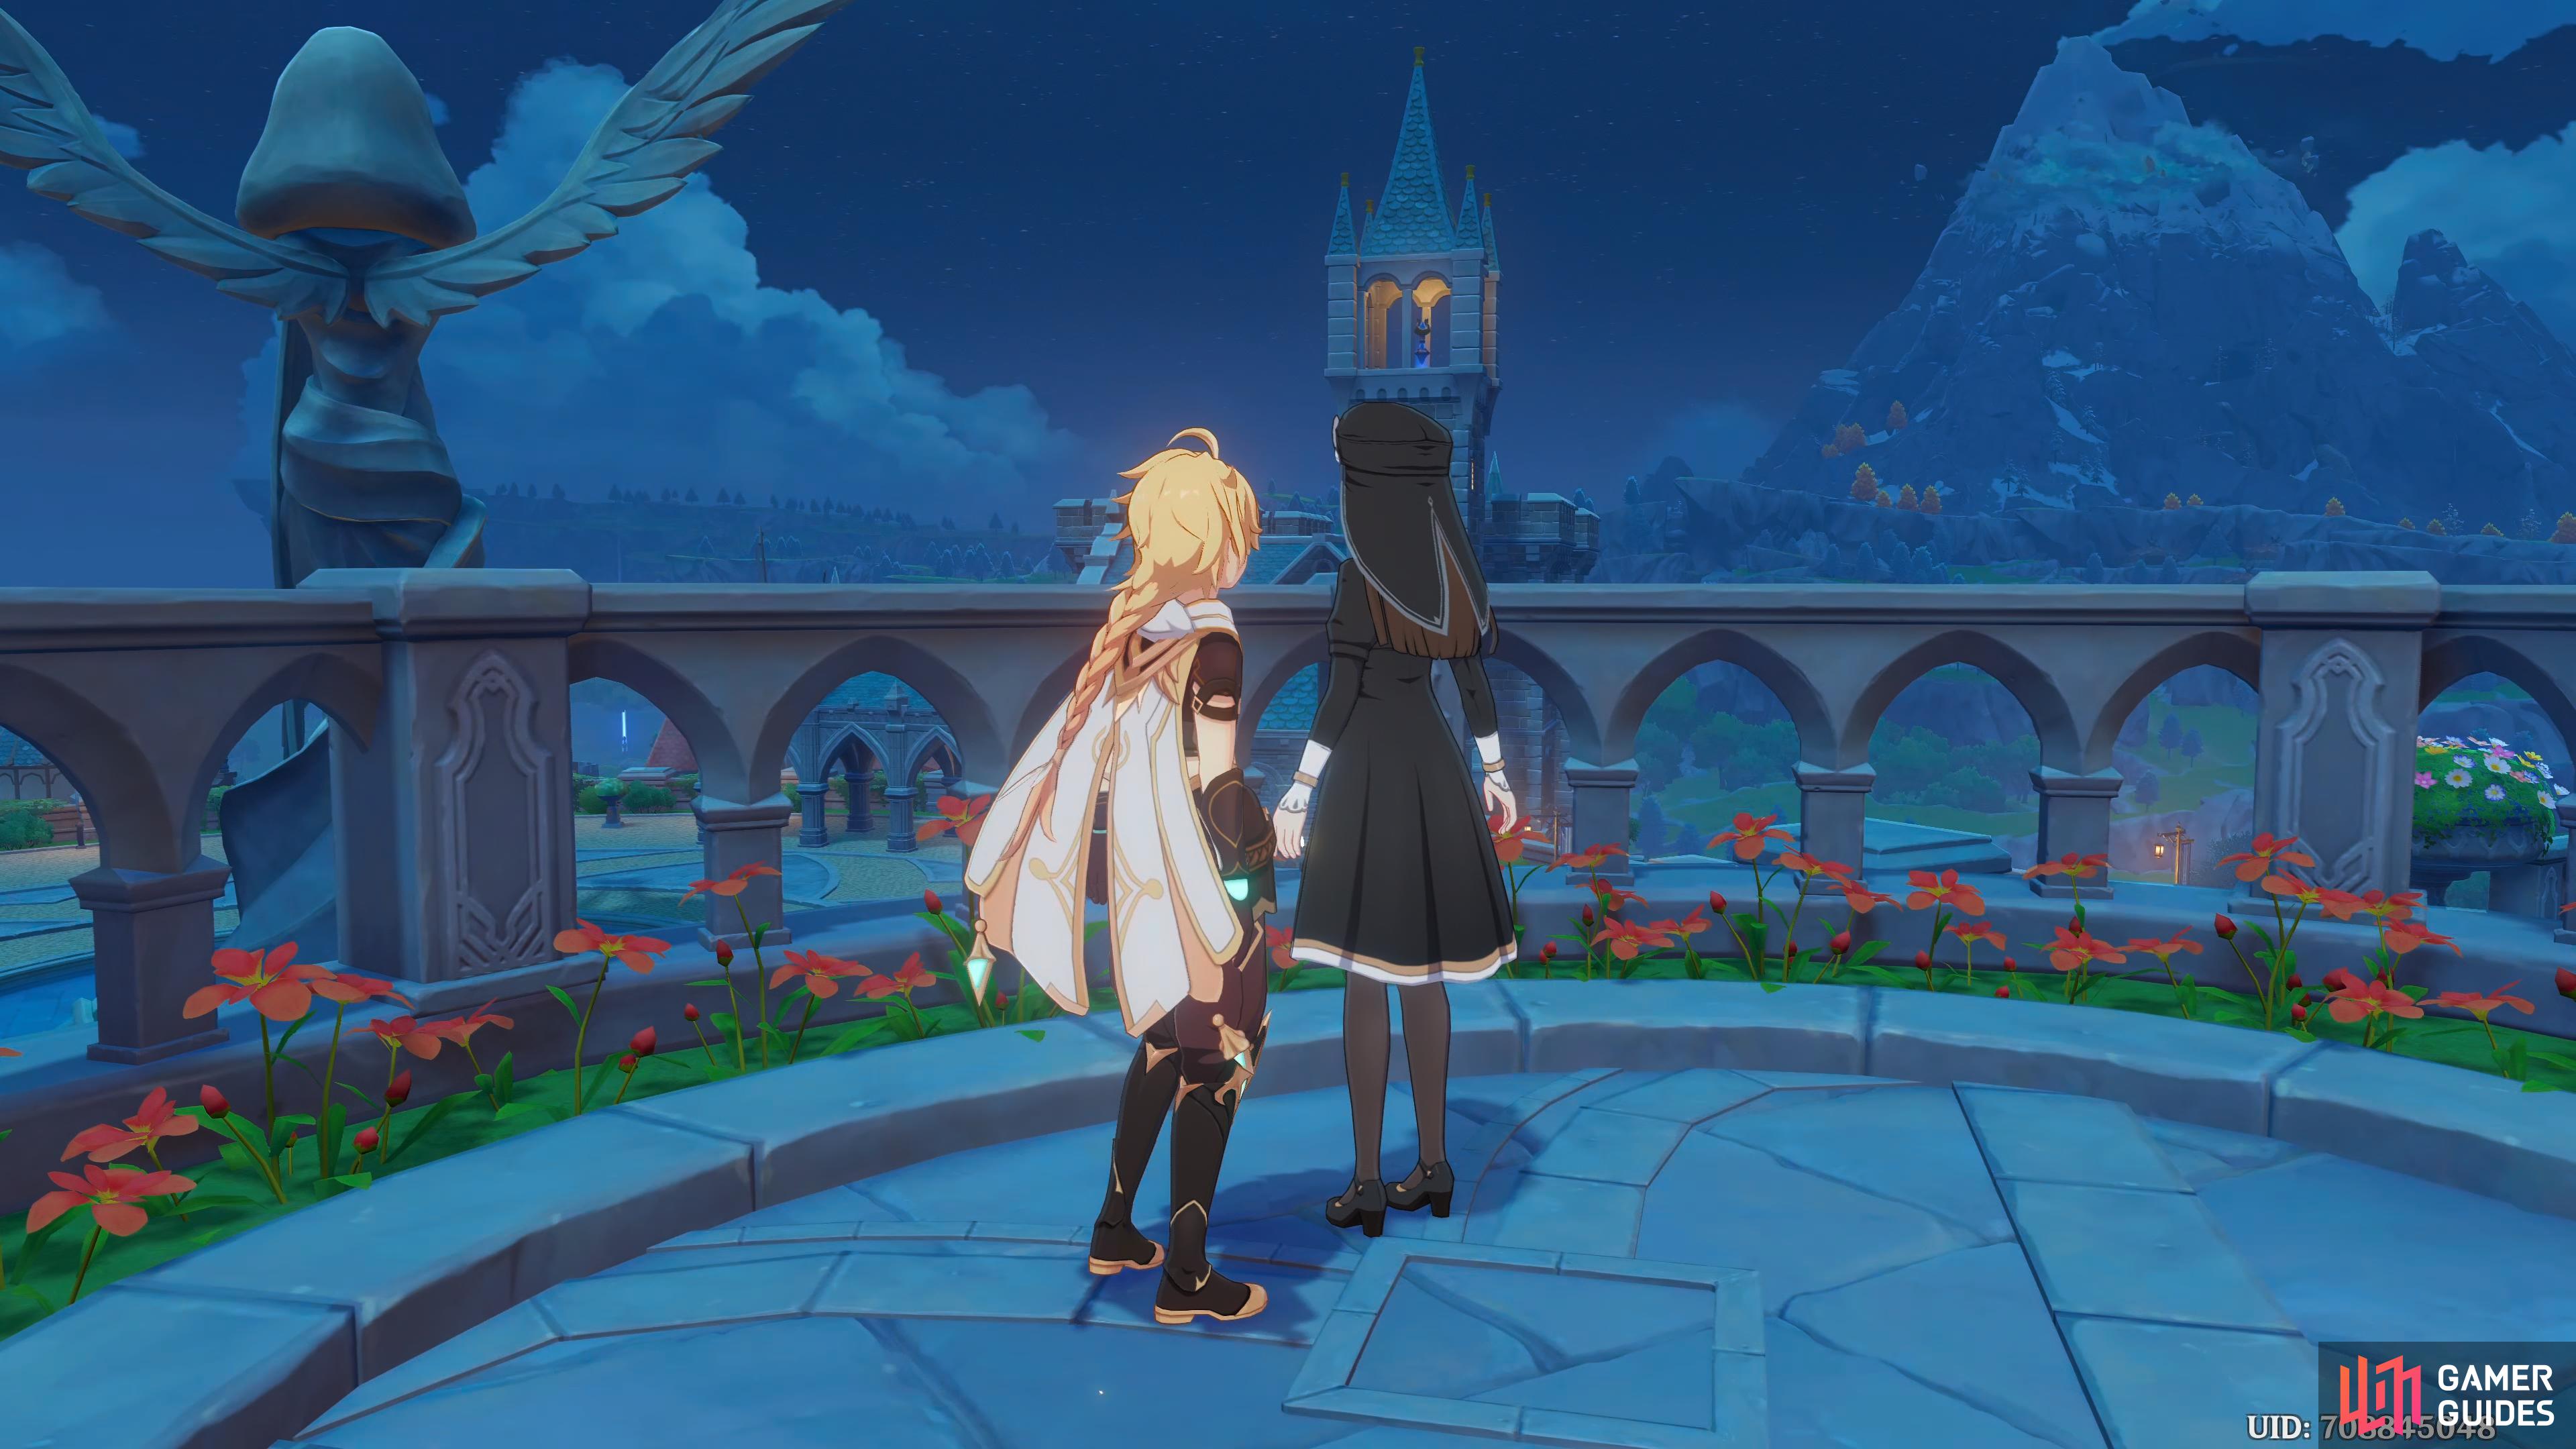 The Traveller and Sister Victoria overlooking the view of Mondstadt.